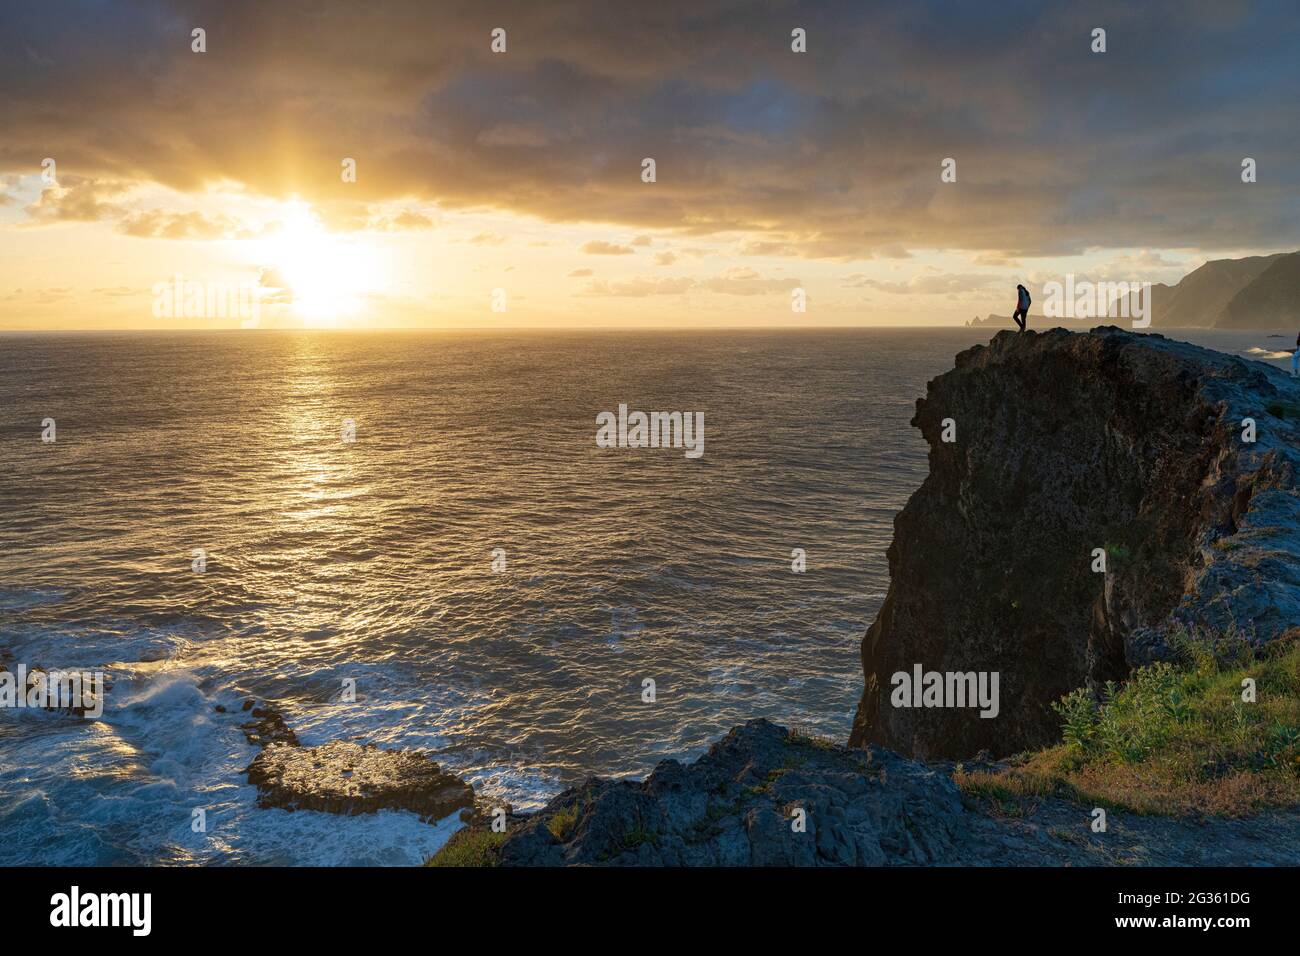 Silhouette of man standing on top of cliffs during sunrise, Madeira island, Portugal Stock Photo